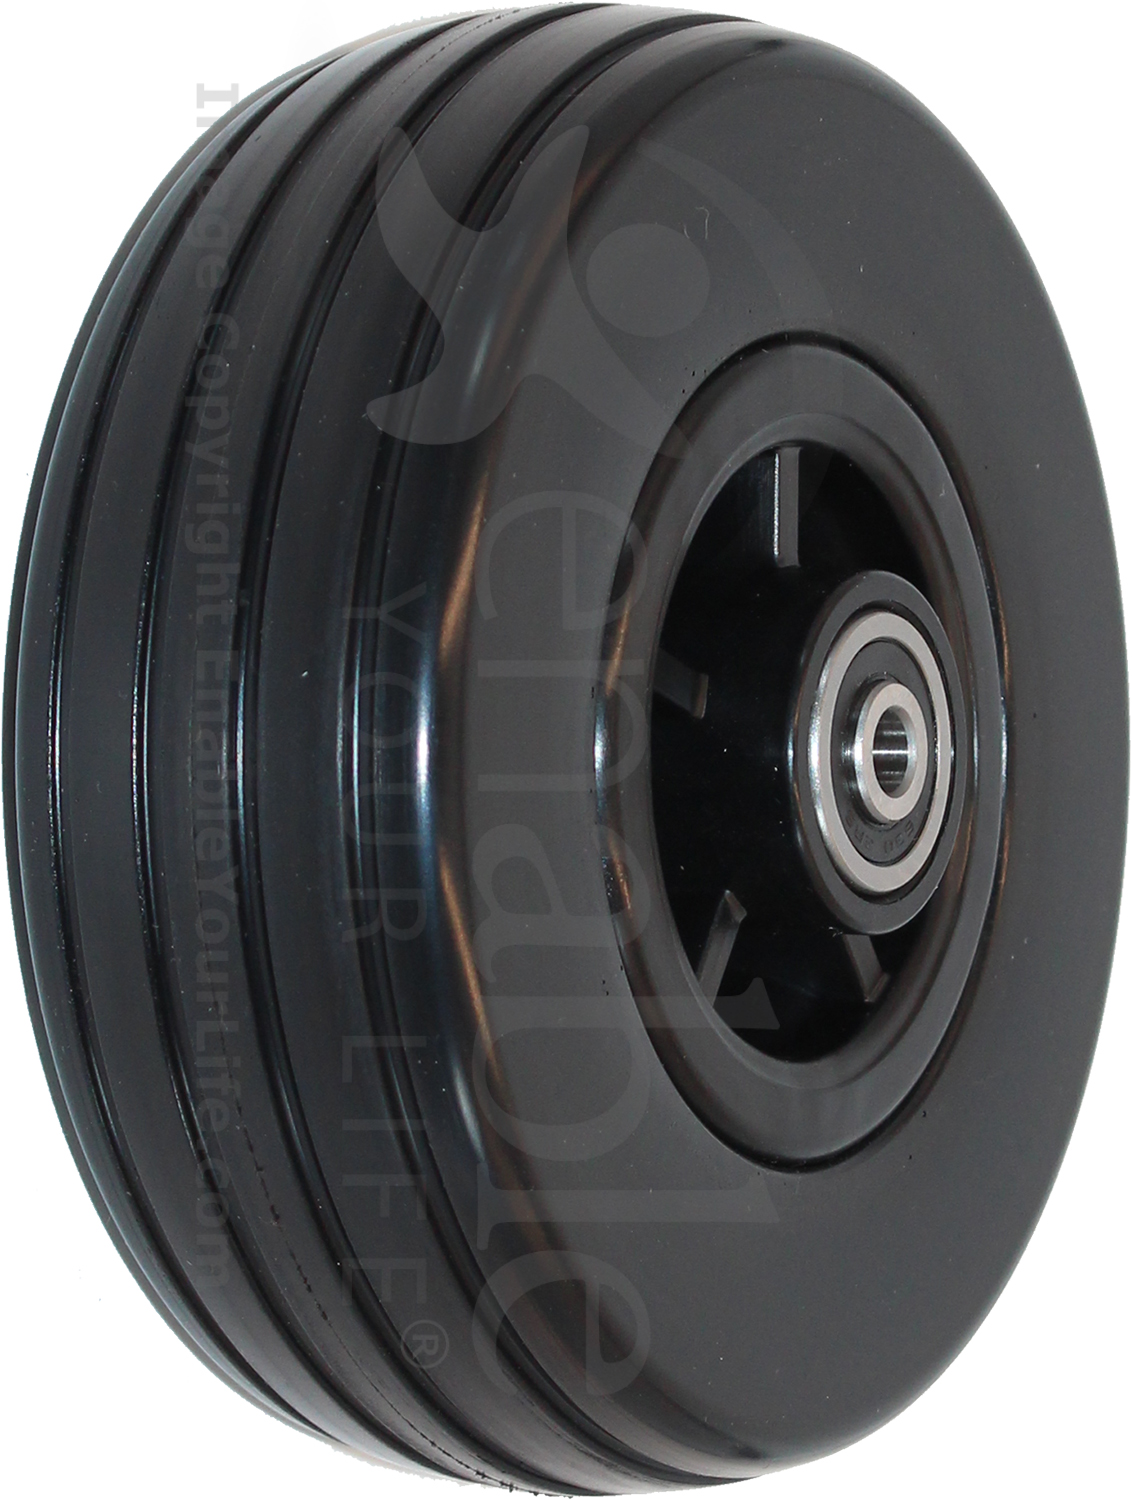 6 x 2 in. Quantum Q6 Edge 2.0 and 2.0 X Replacement Wheelchair Caster Wheel with Black Tire (Compare to Pride Part WHLASMB7110039) - Angled view shown